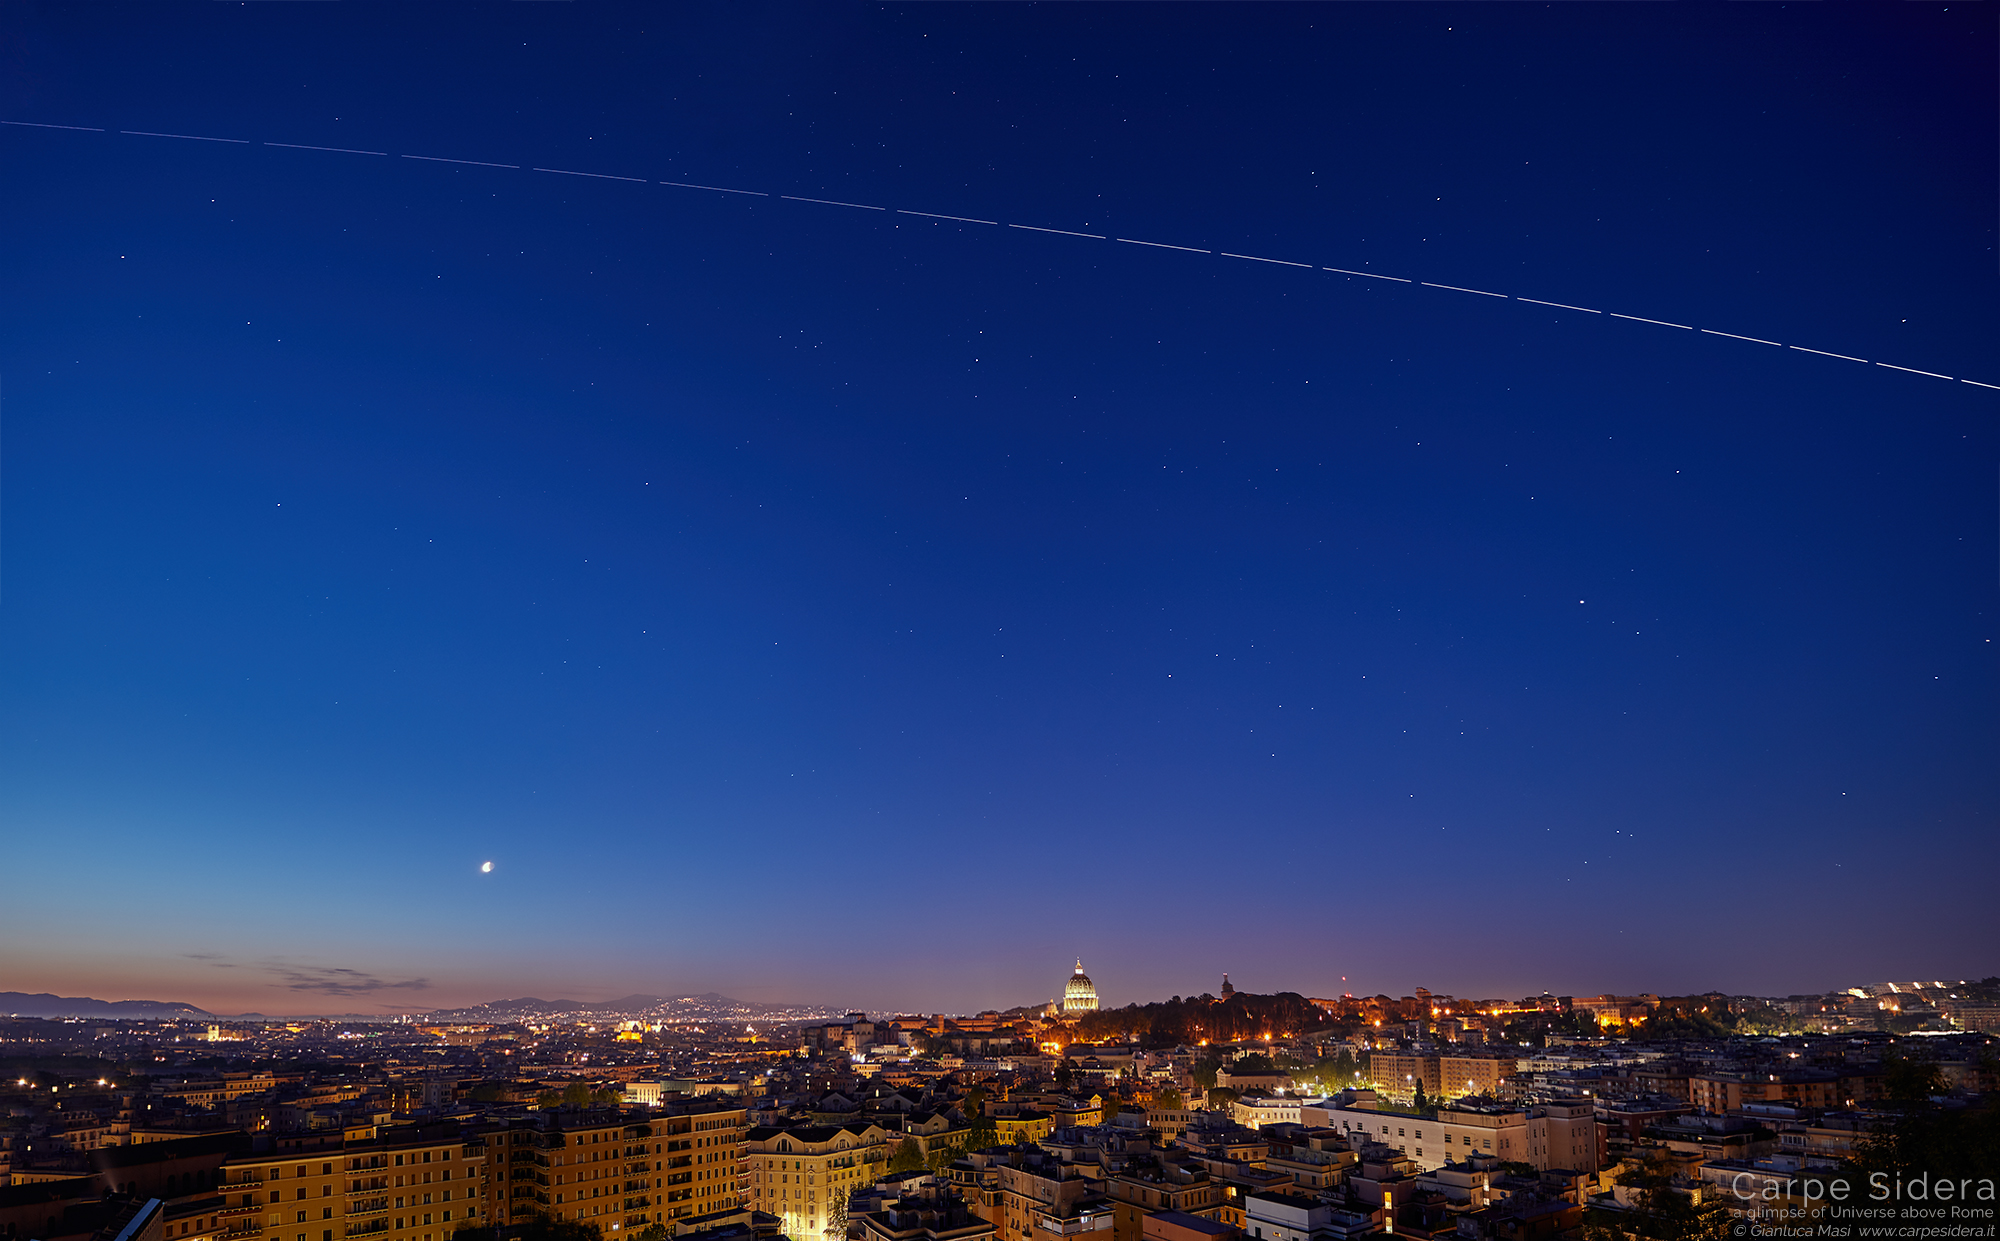 The International Space Station (ISS) crosses the sky above Rome at dawn - 30 Apr. 2019